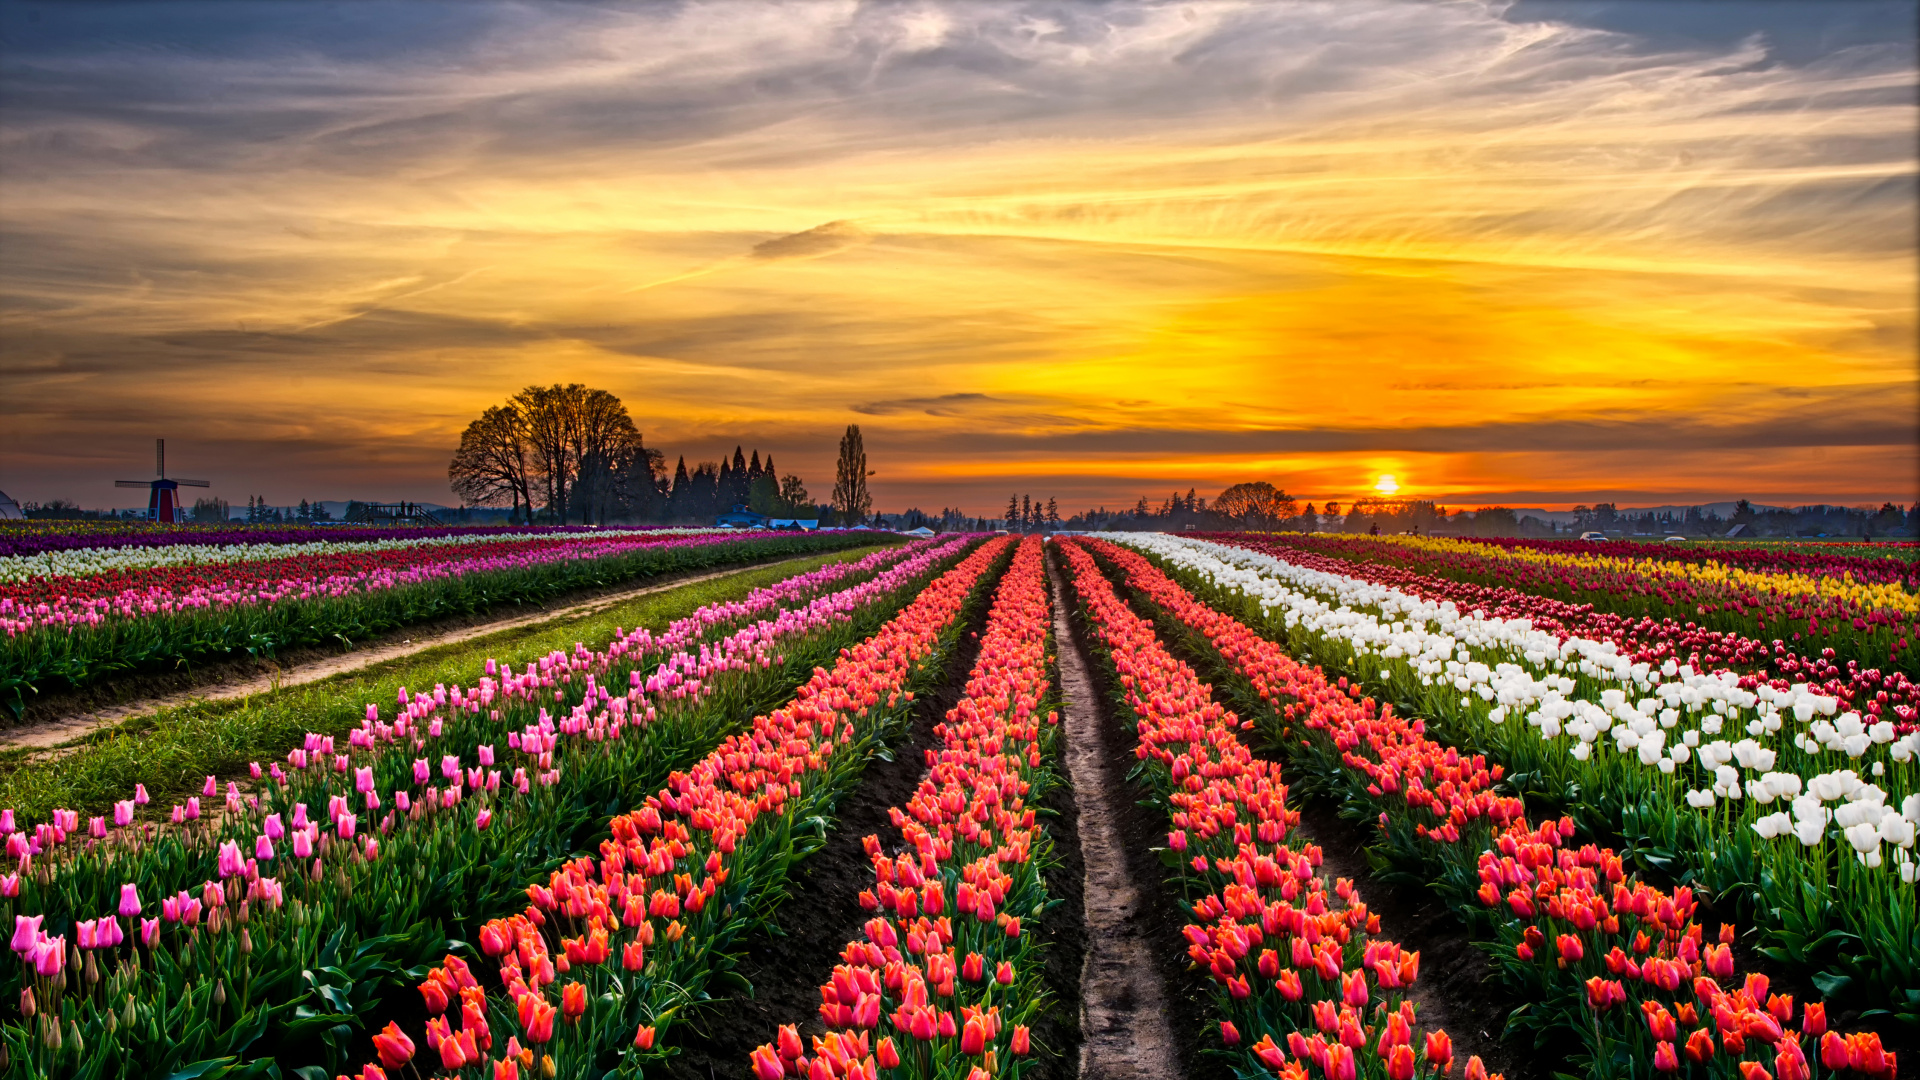 Pink and White Flower Field During Sunset. Wallpaper in 1920x1080 Resolution